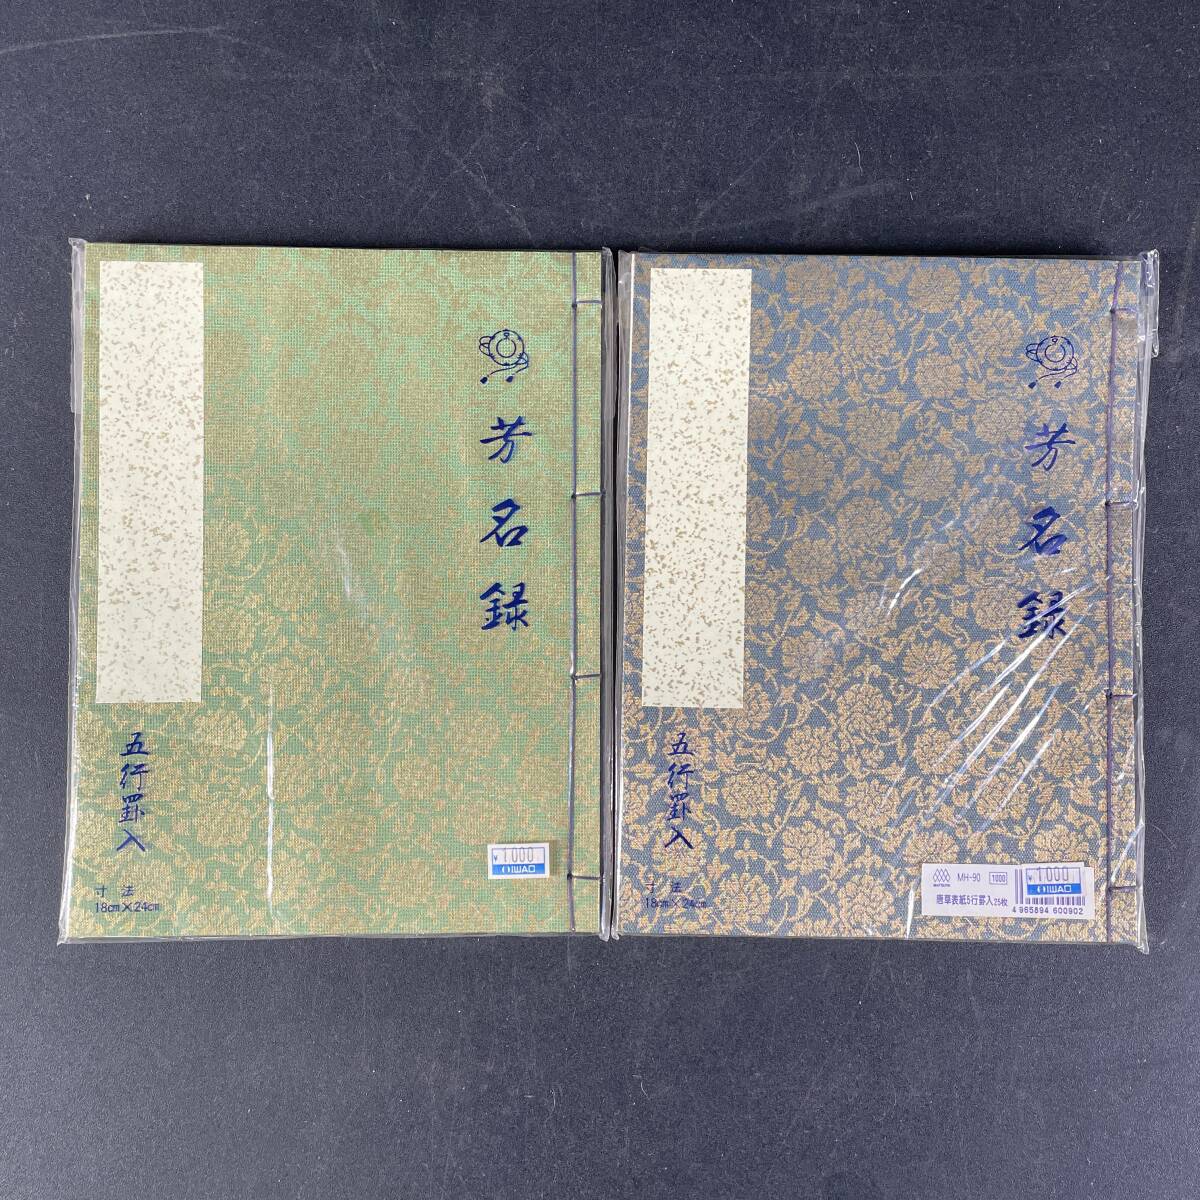 . name record . summarize 2 pcs. unused long-term keeping goods / Tang . cover 5 line . go in 25 sheets /. line . go in size 18cm*24cm. name .. surface ceremonial occasions guest book address full name /t80b